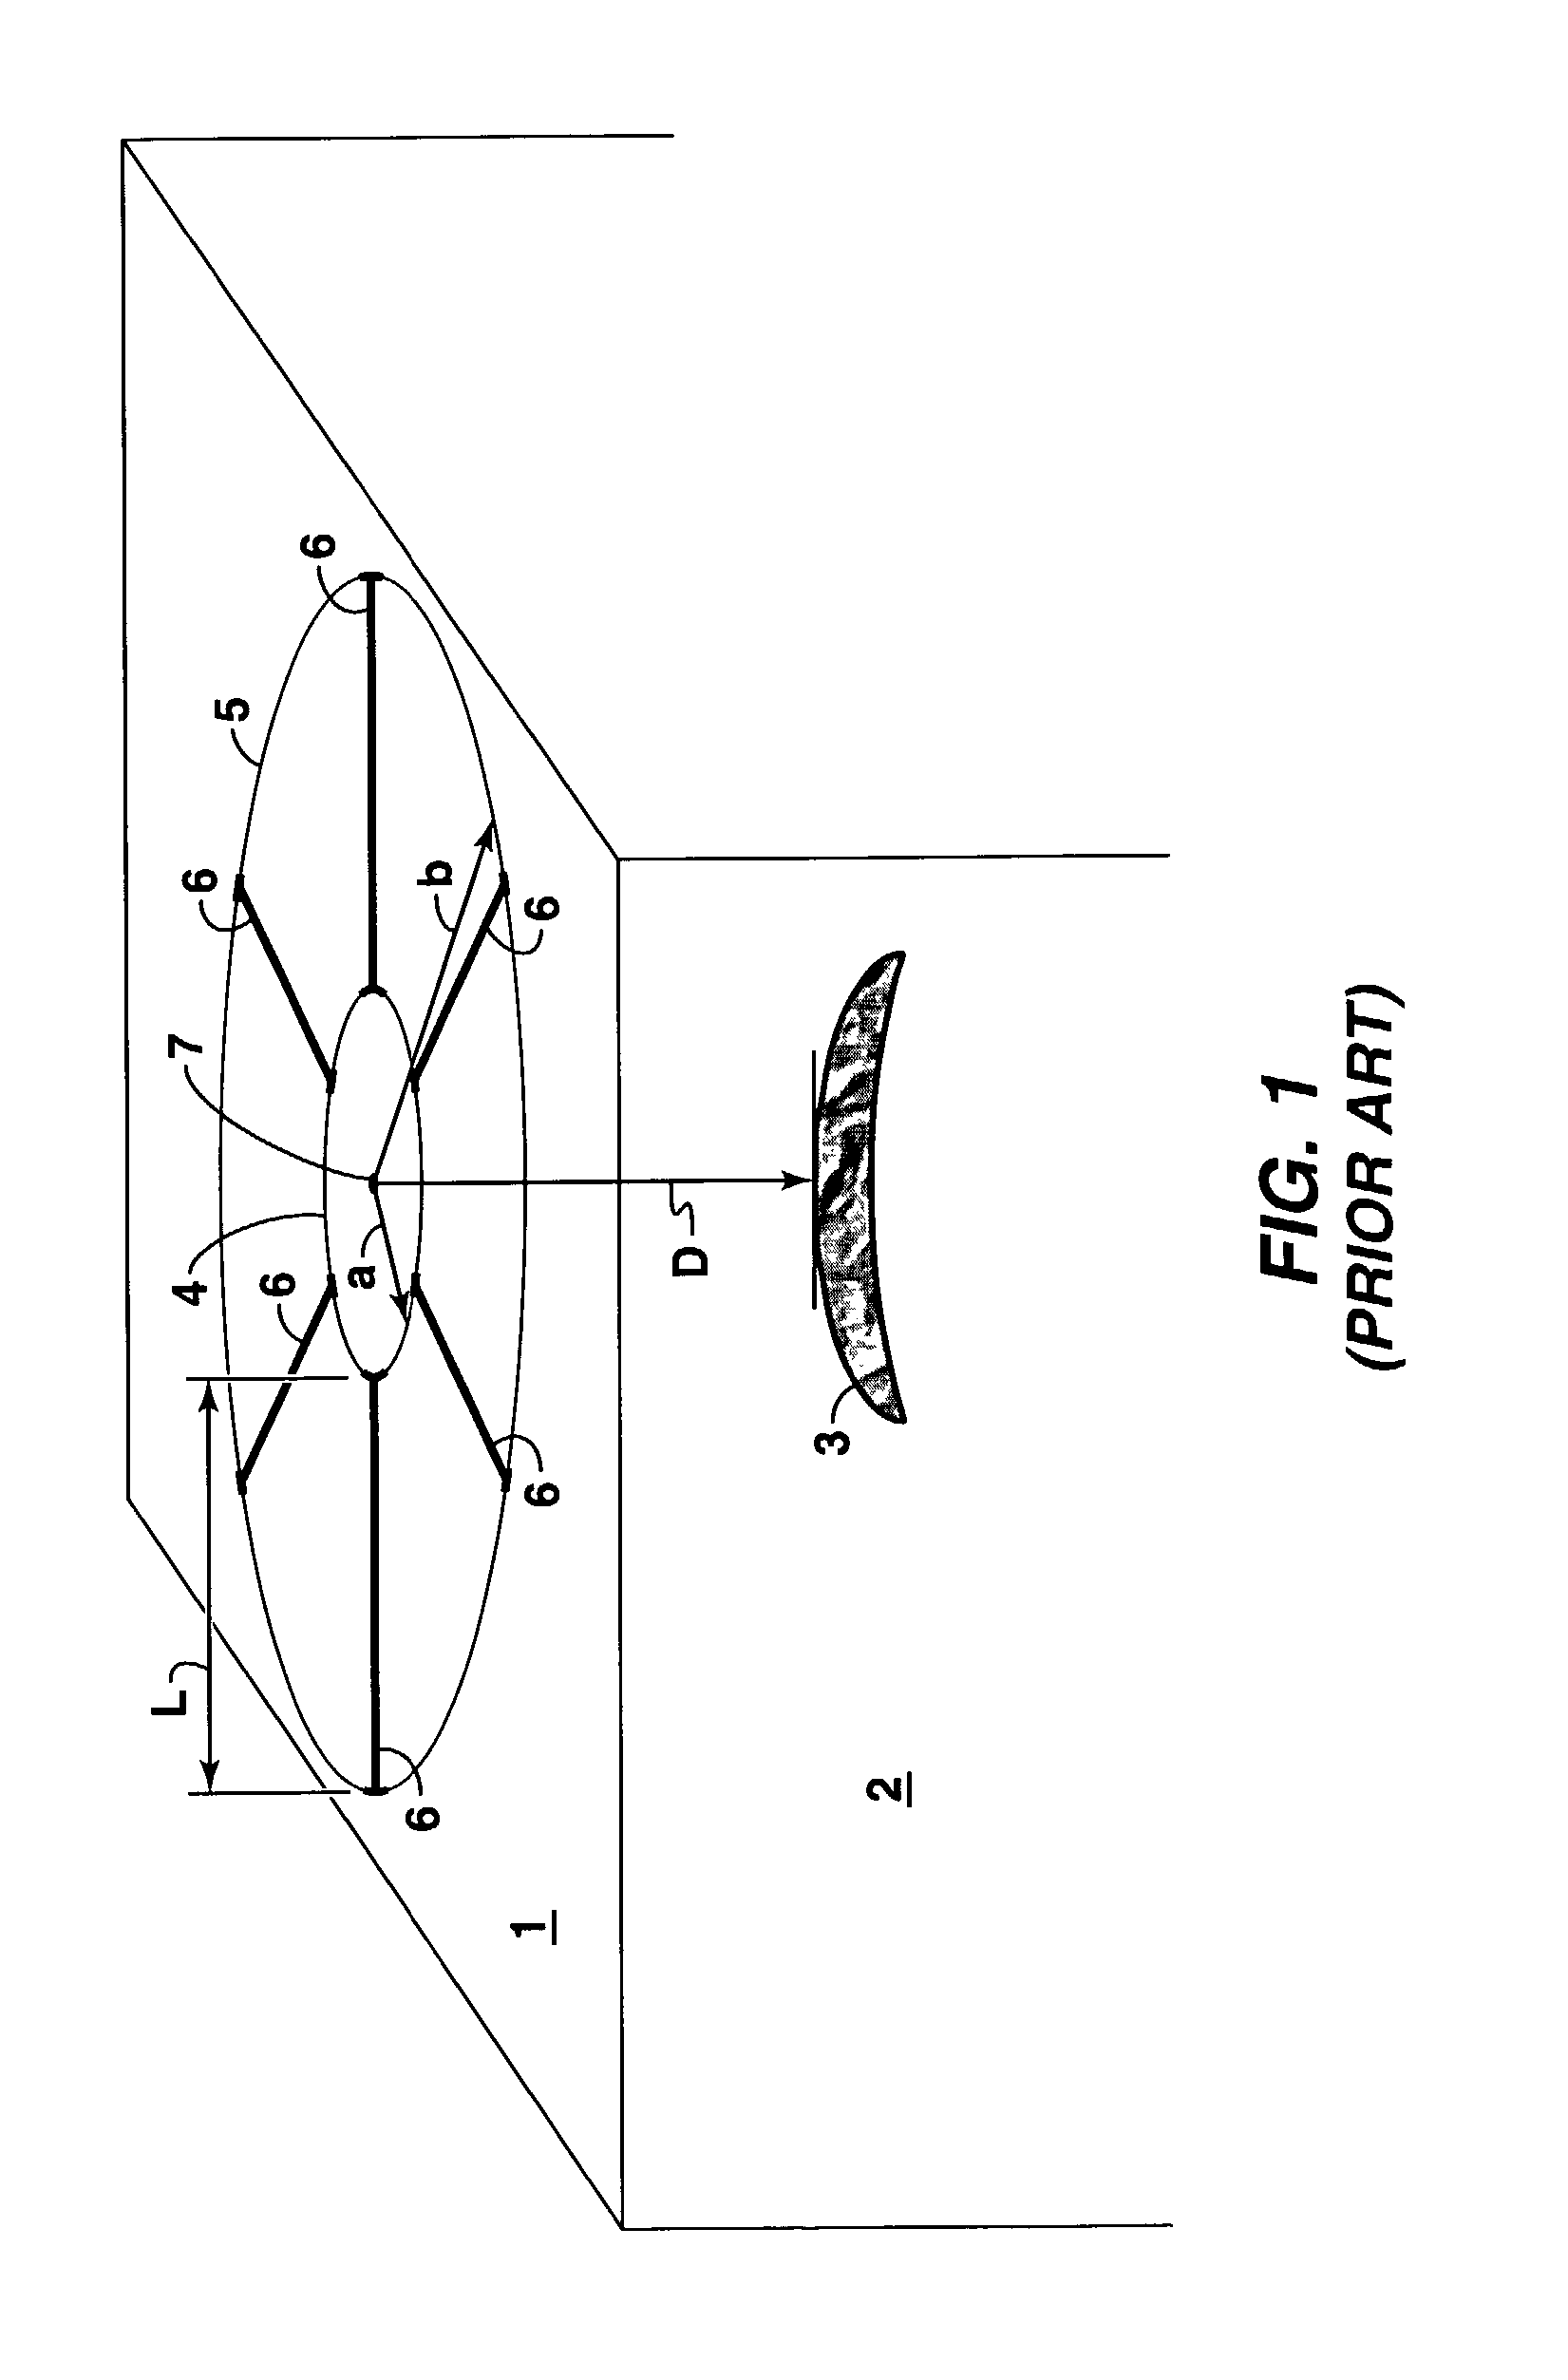 Method of imaging subsurface formations using a virtual source array